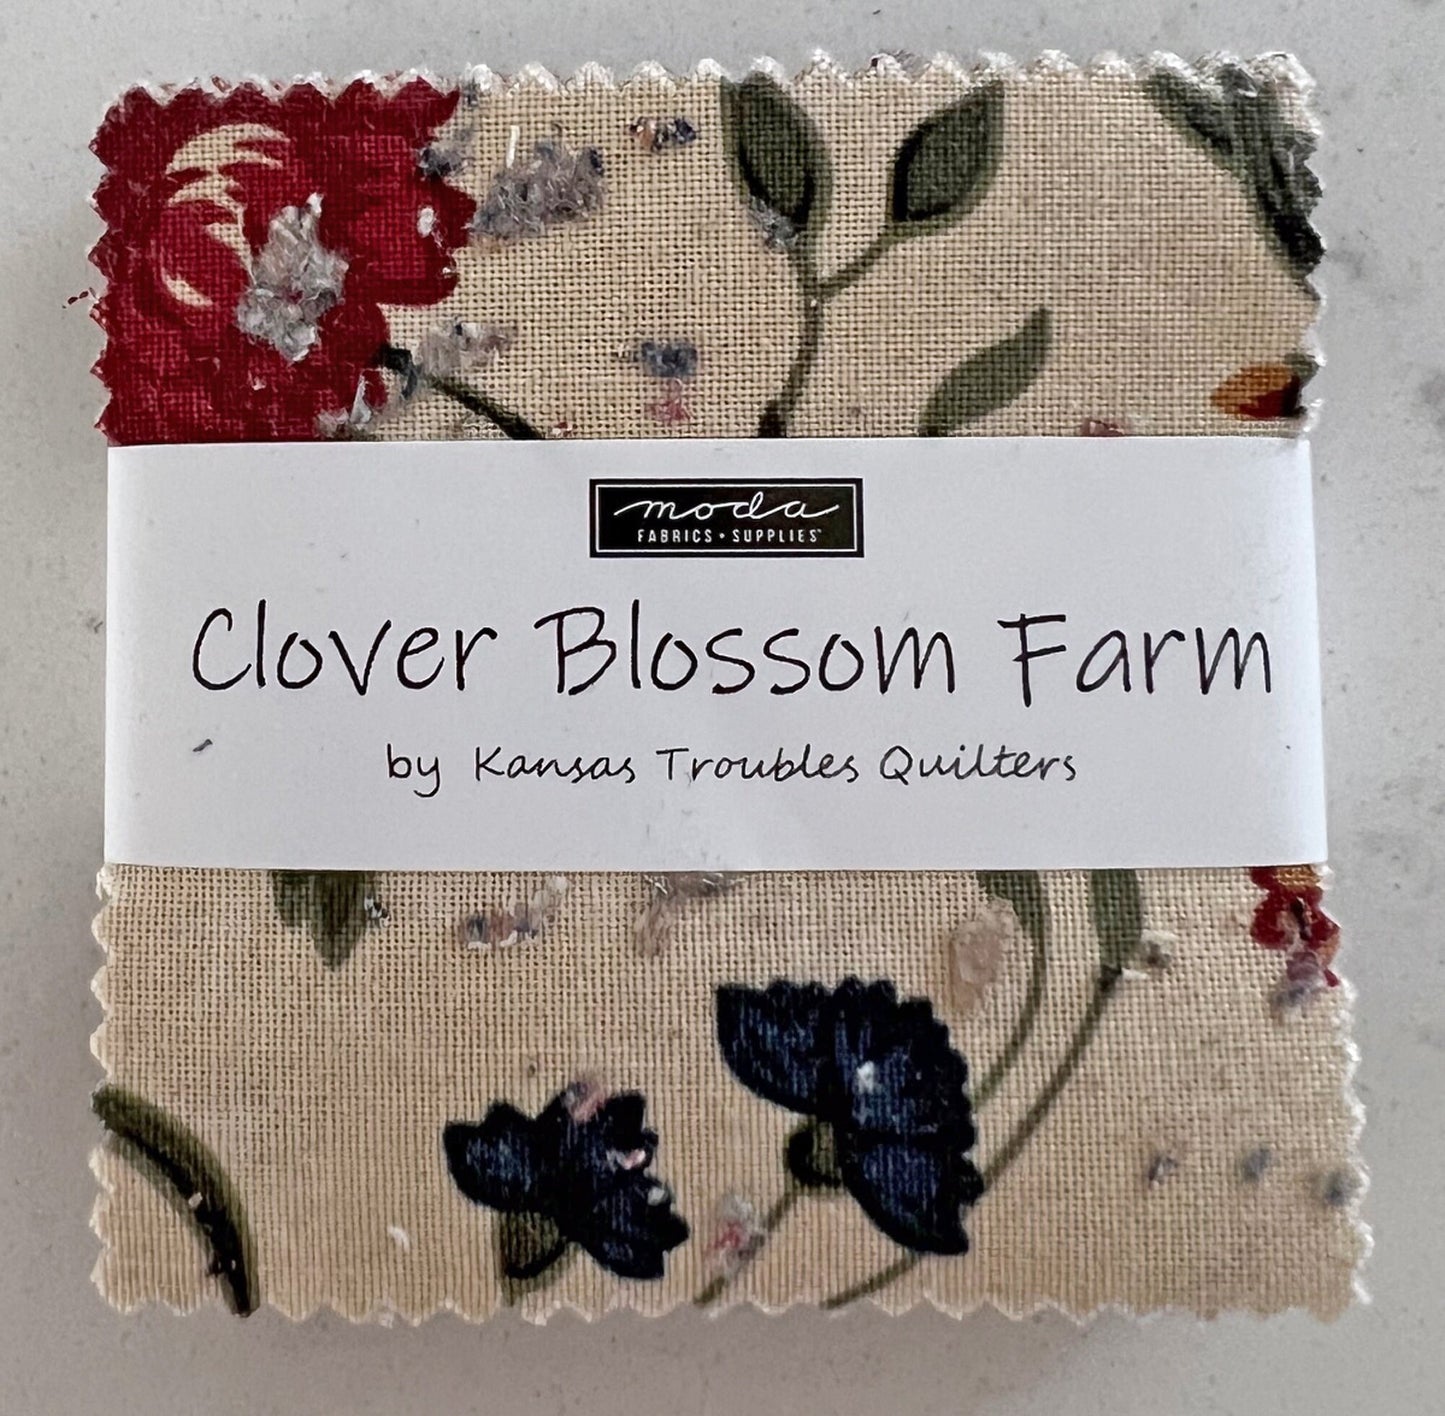 Tulips in Clover Pillow Cover Pattern Kit, Moda PS 9710 MC, Clover Blossom Farm Mini Charm with Melon Template, Kansas Troubles